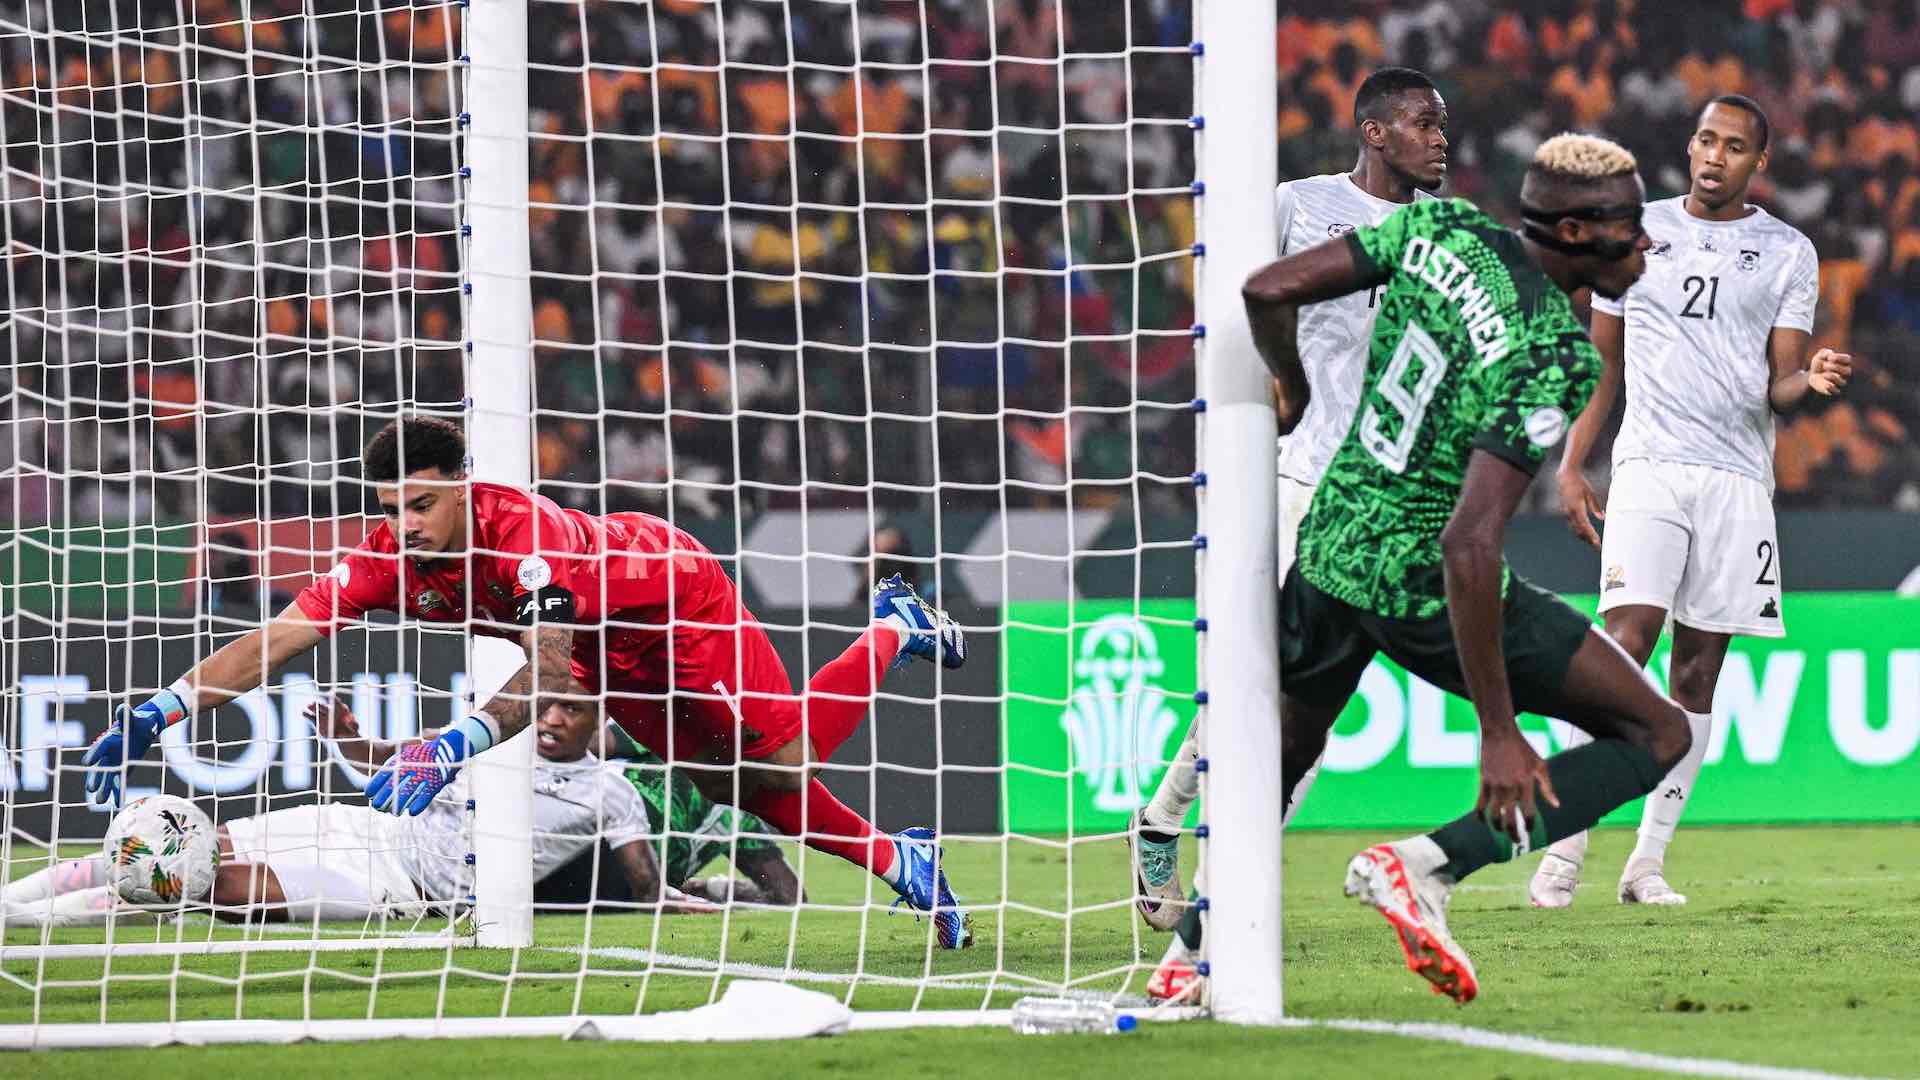 Nigeria advances to AFCON final with penalty win